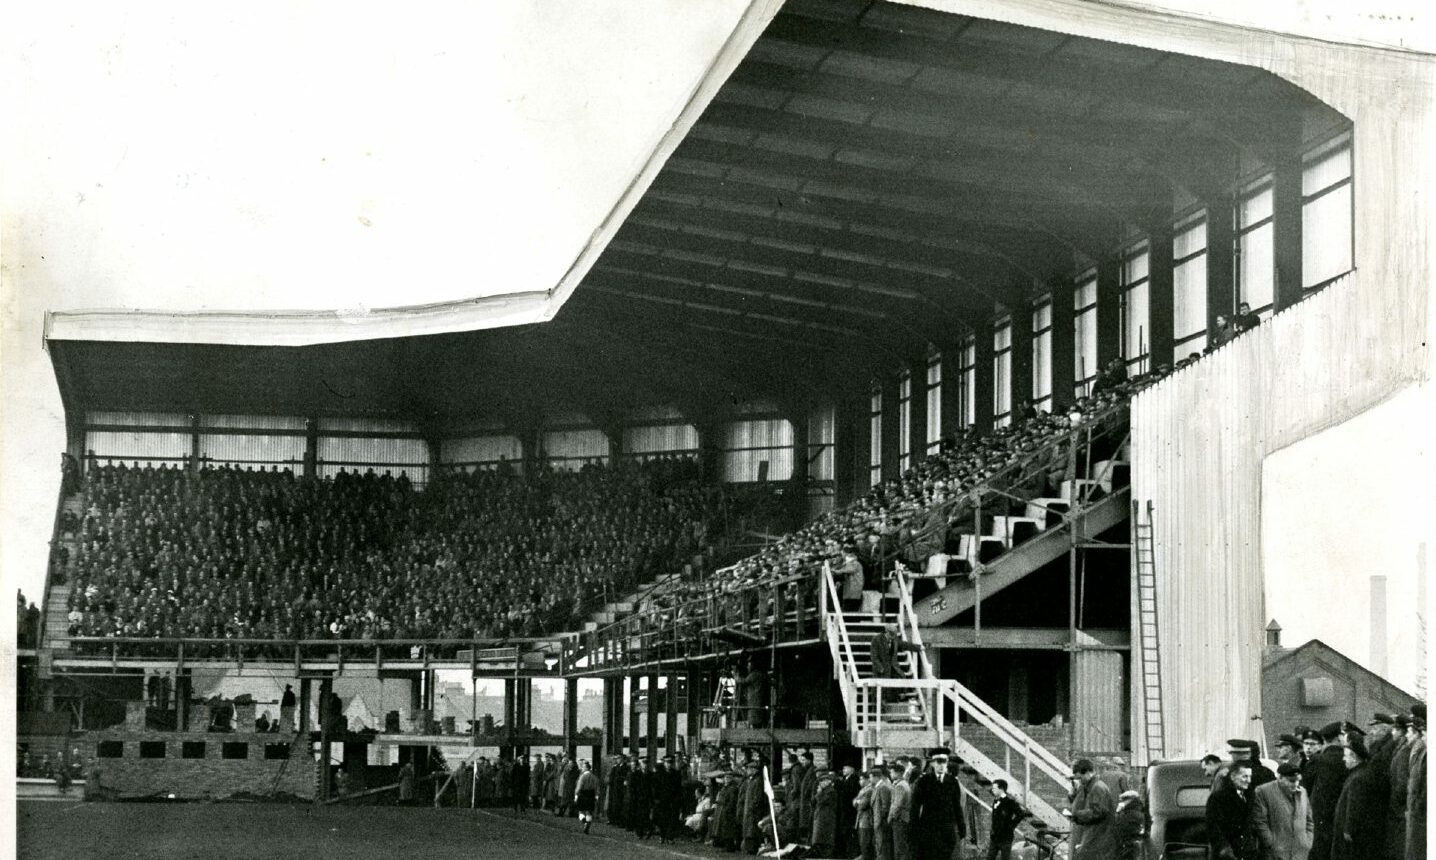 Looking back on the history of Dundee United's Tannadice Park home